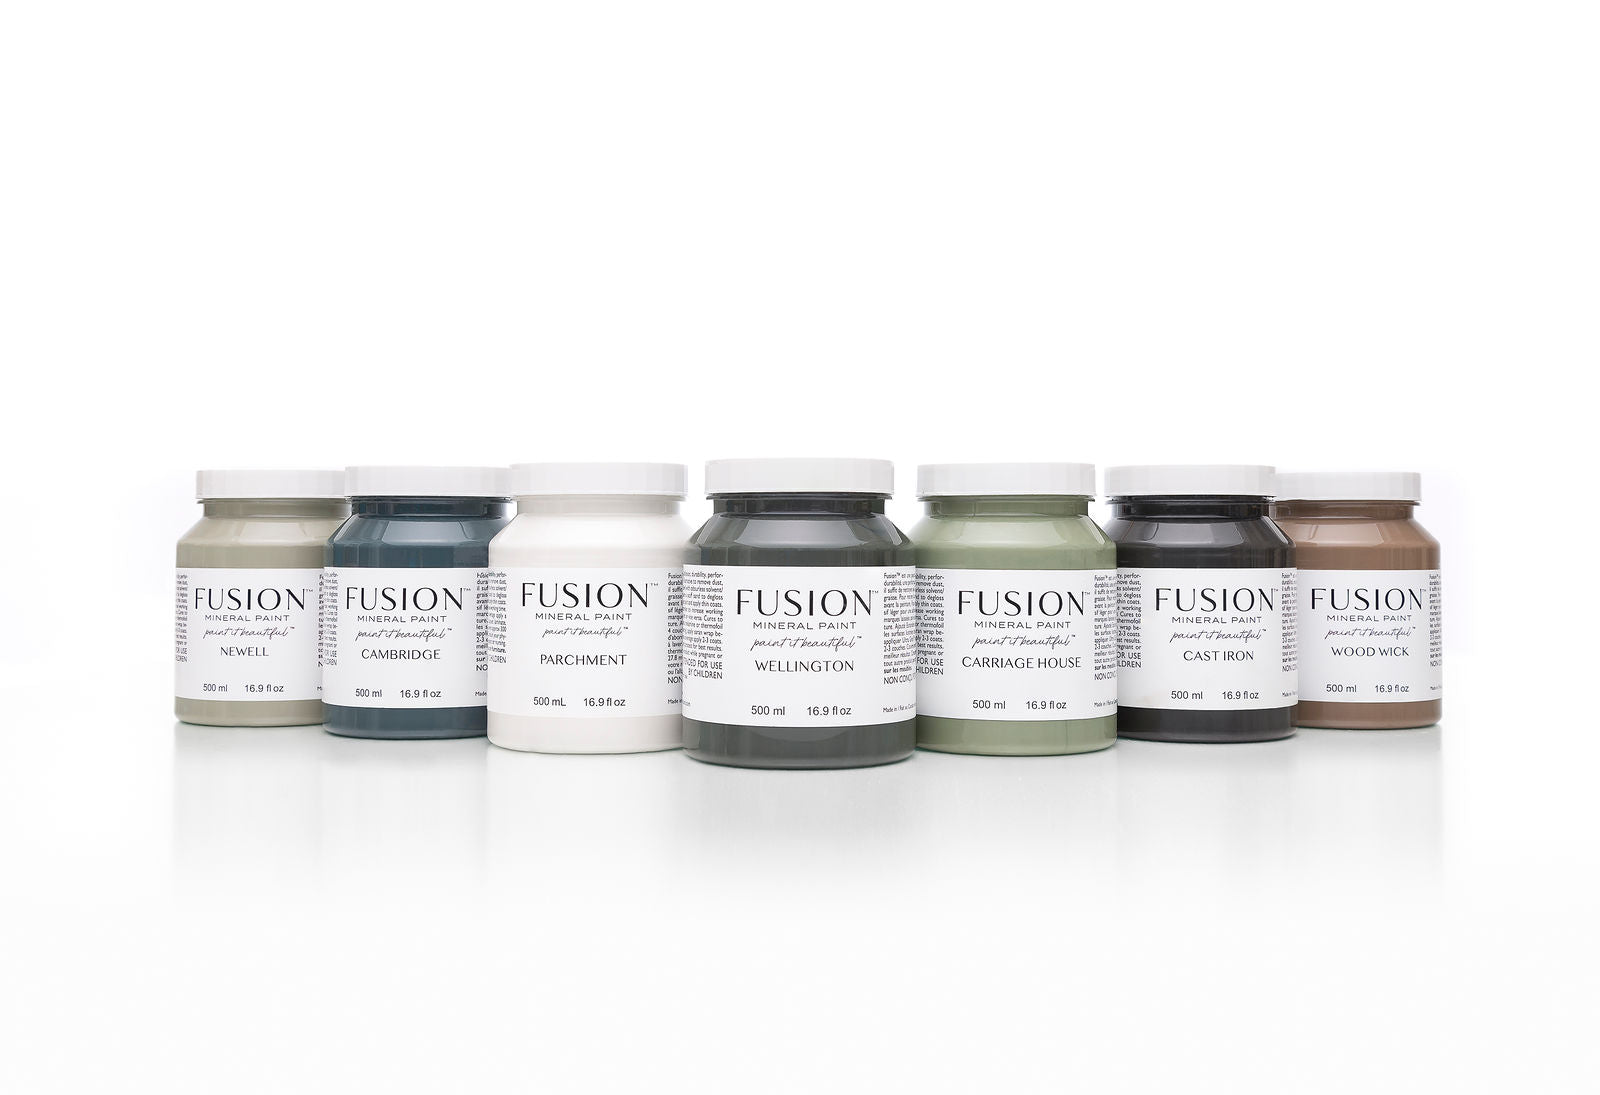 7 New Fusion Mineral Paint Colors